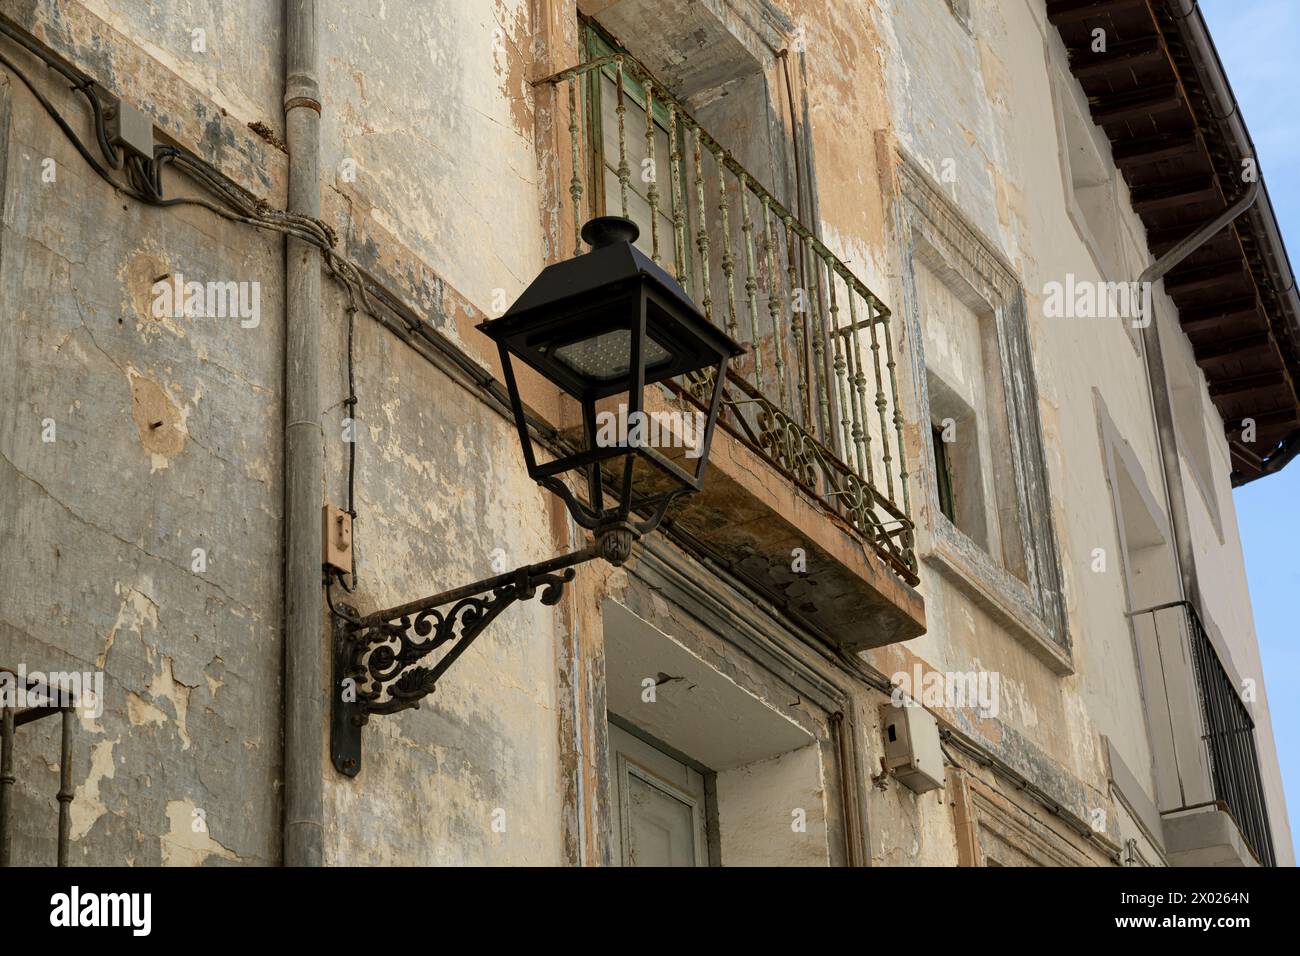 An old street lamp hangs from a building with peeling paint, highlighting the rustic charm of urban decay. Stock Photo